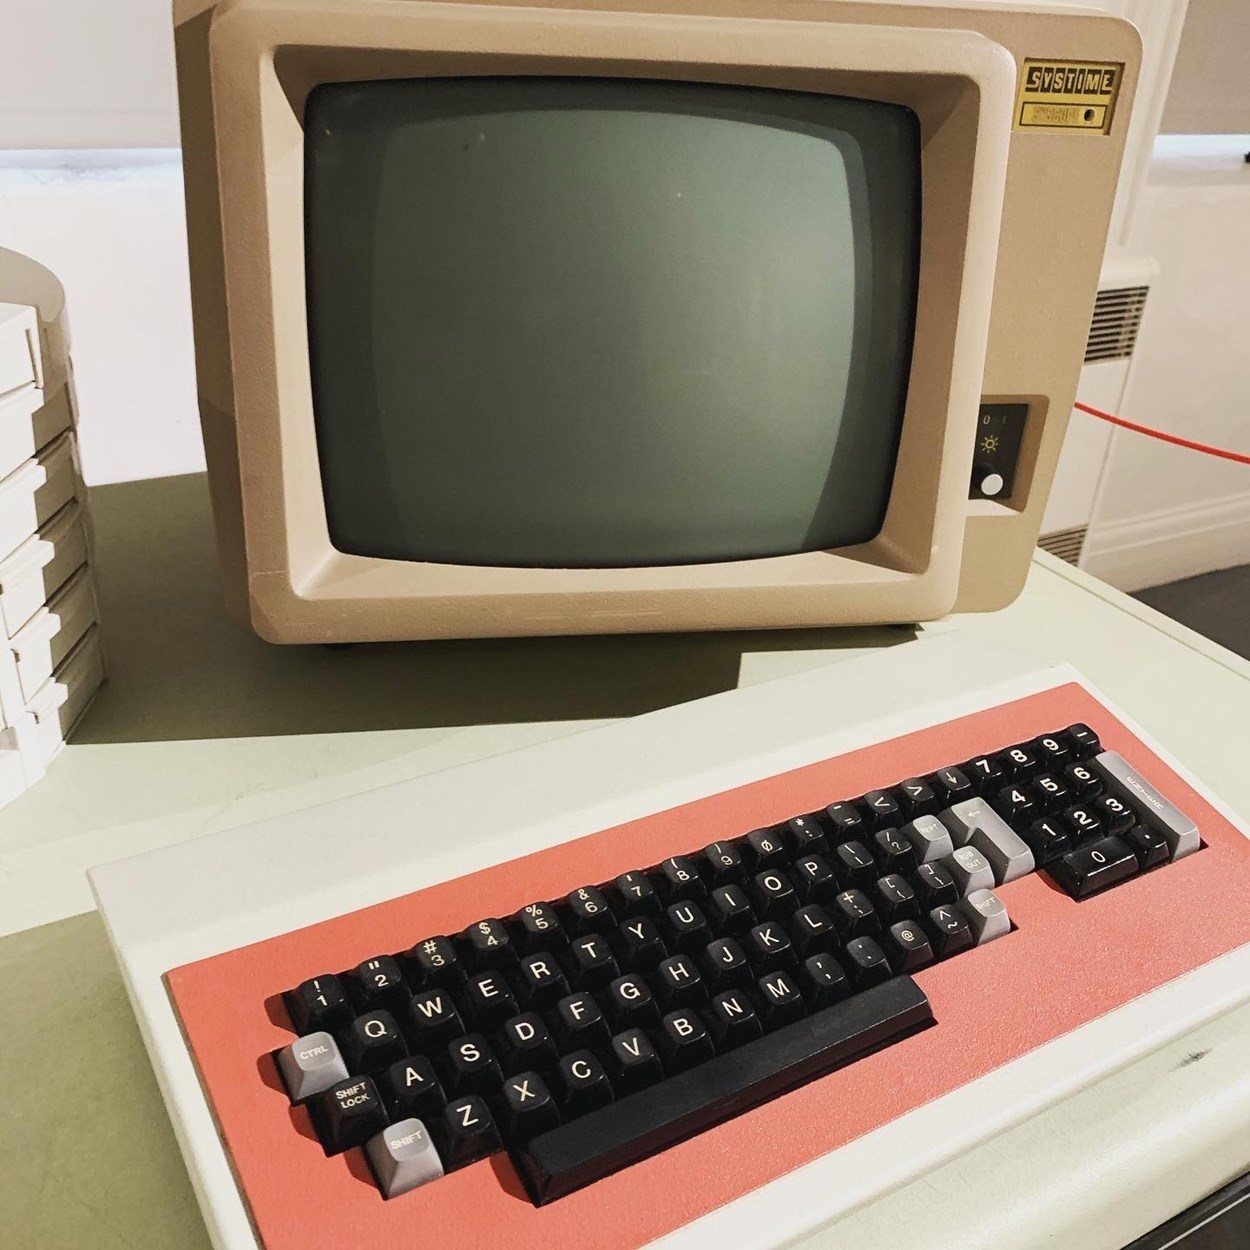 Leeds to innovation online: An old Systime computer on display at Leeds Industrial Museum as part of Leeds to Innovation